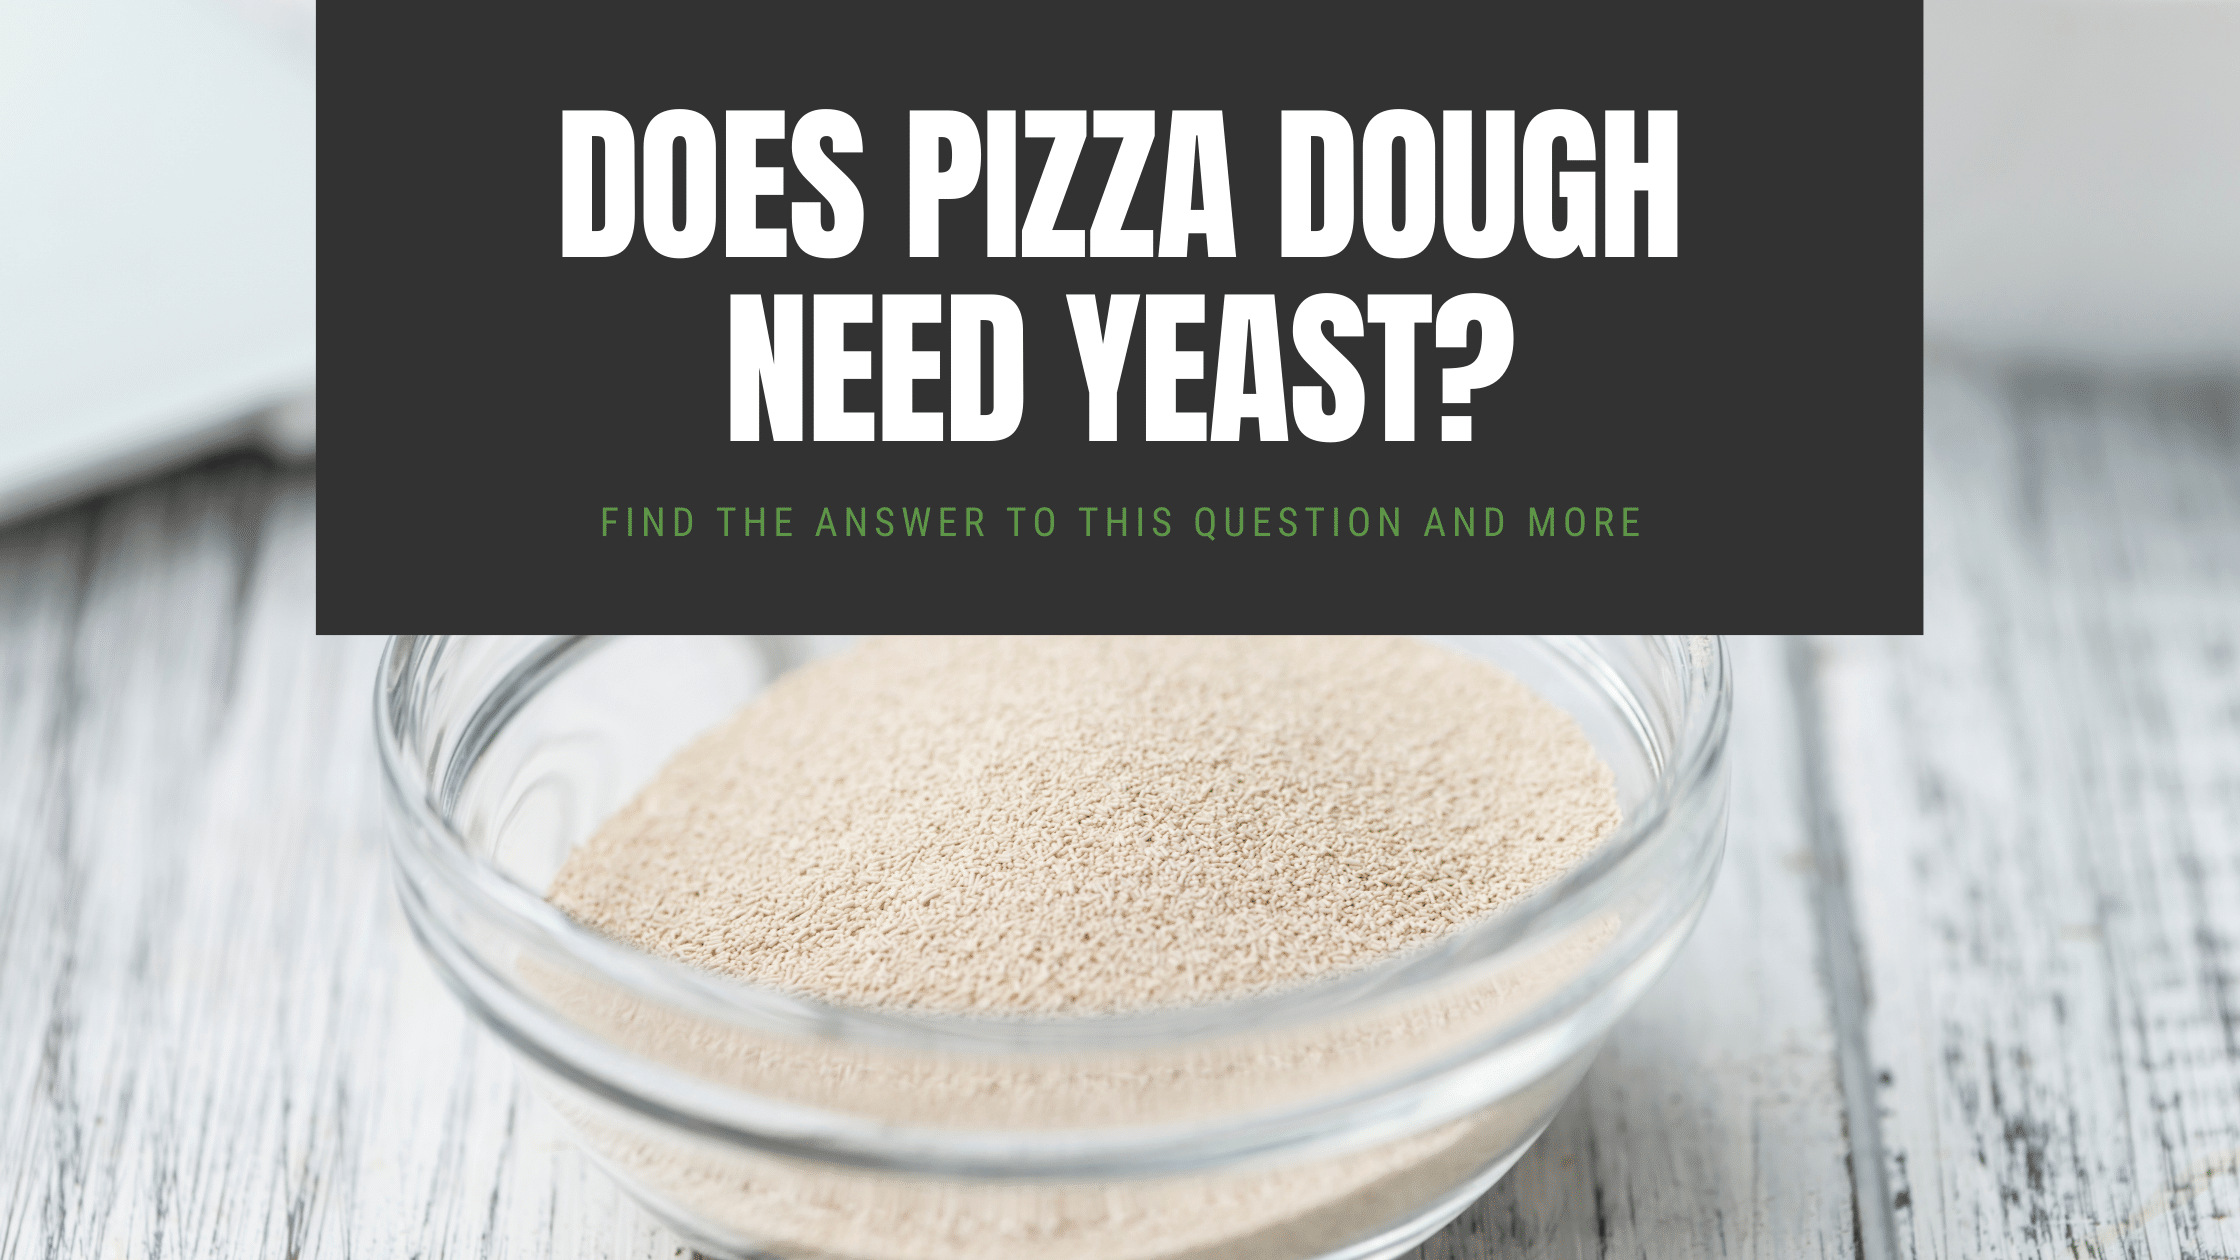 Does Pizza Need Yeast? You Bet! Here’s What You Need to Know